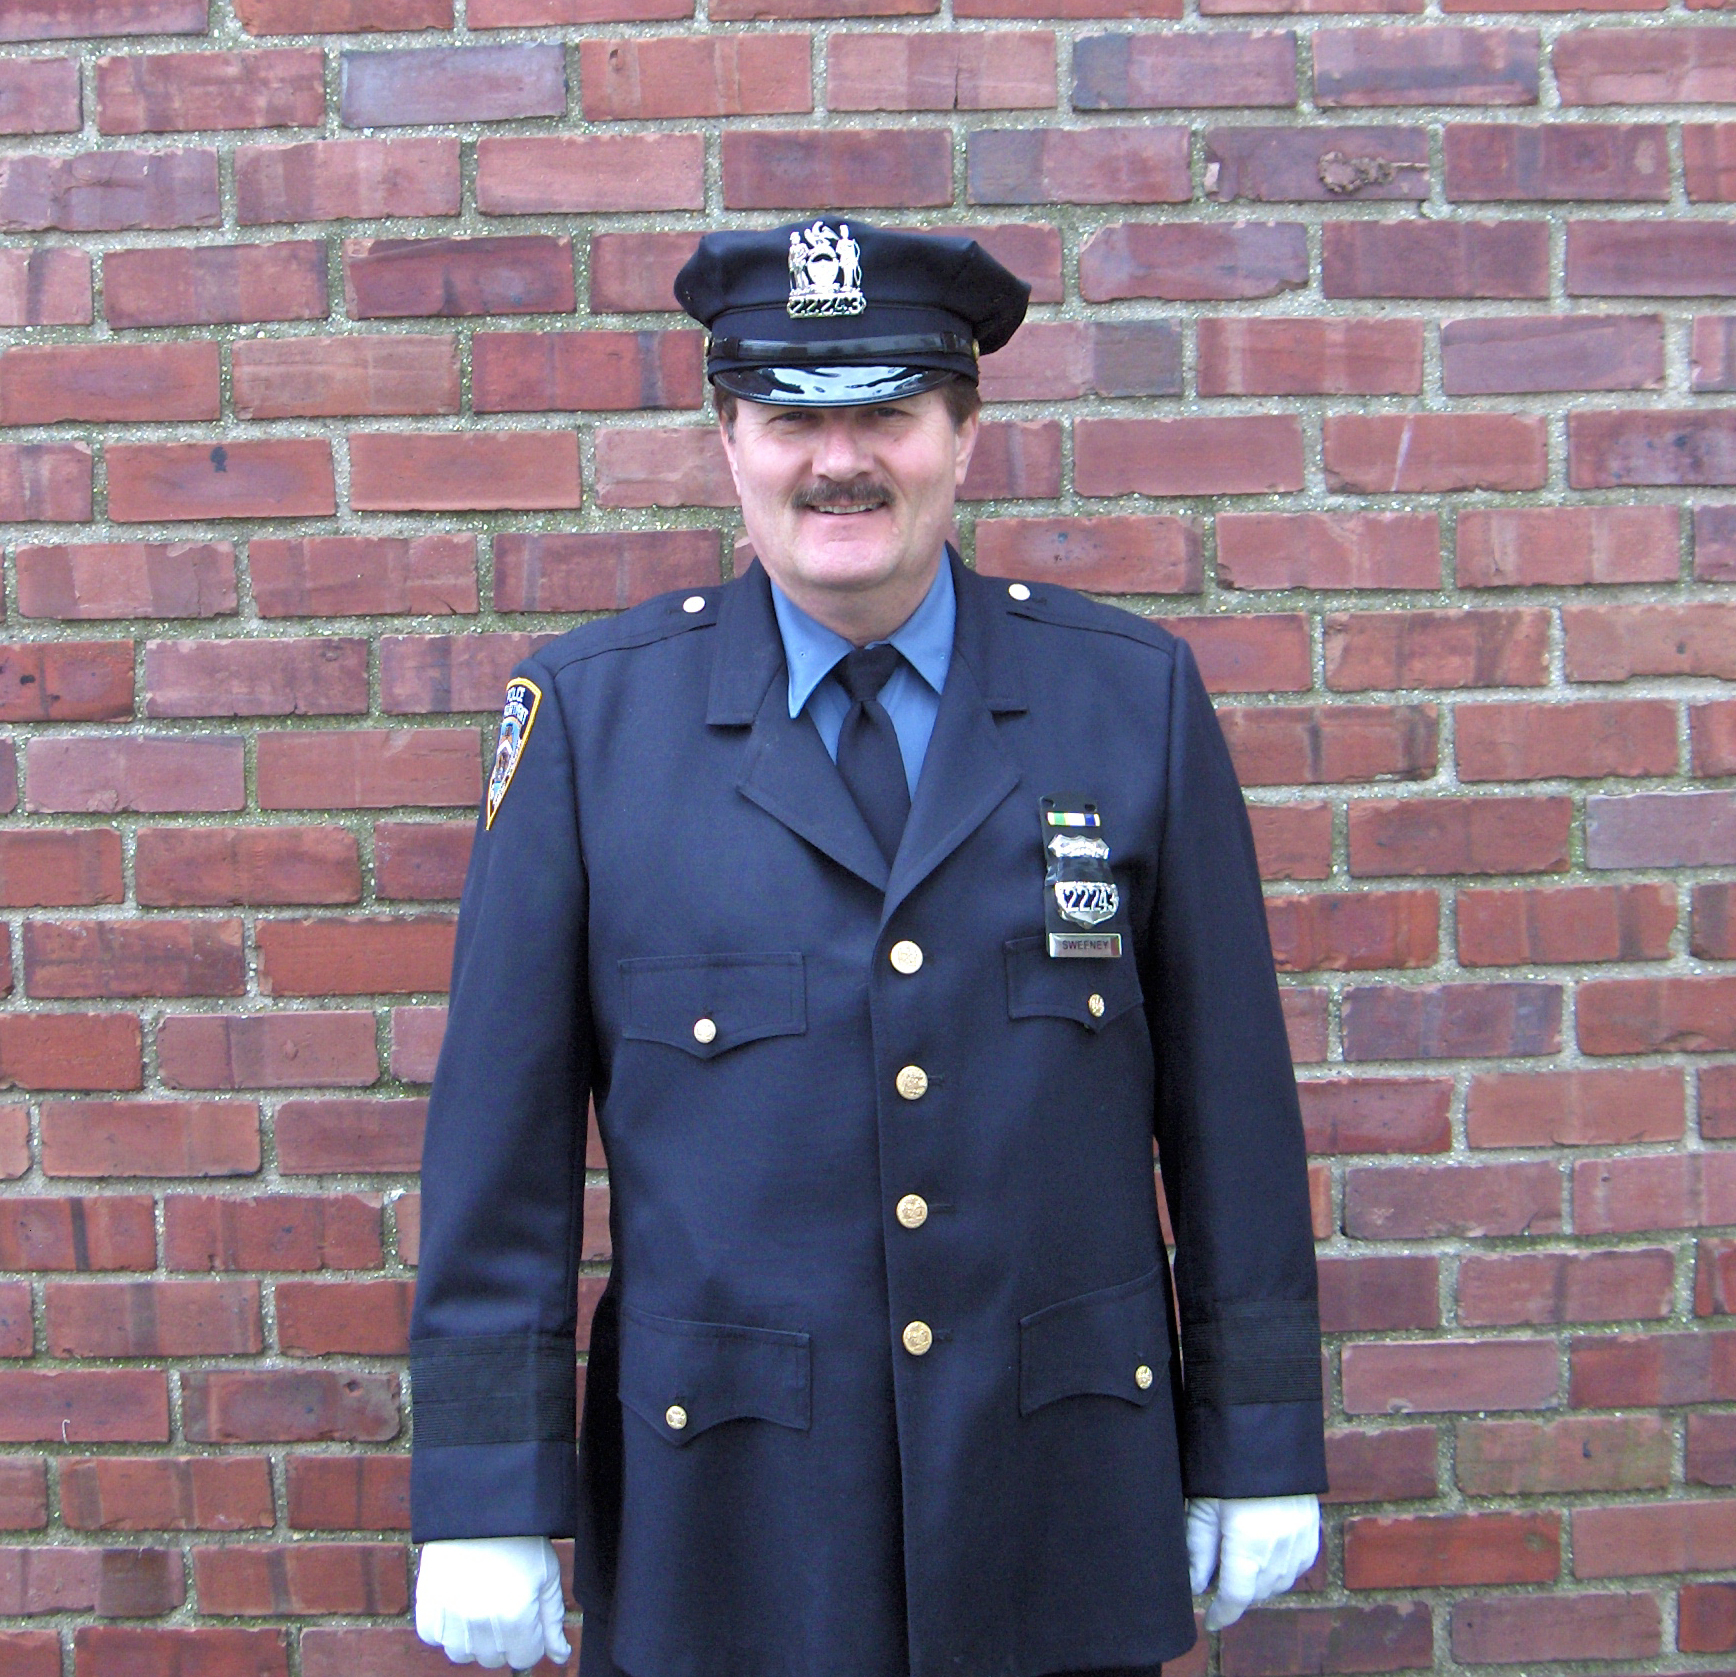 Robert as Officer Mike Stone from the Film 